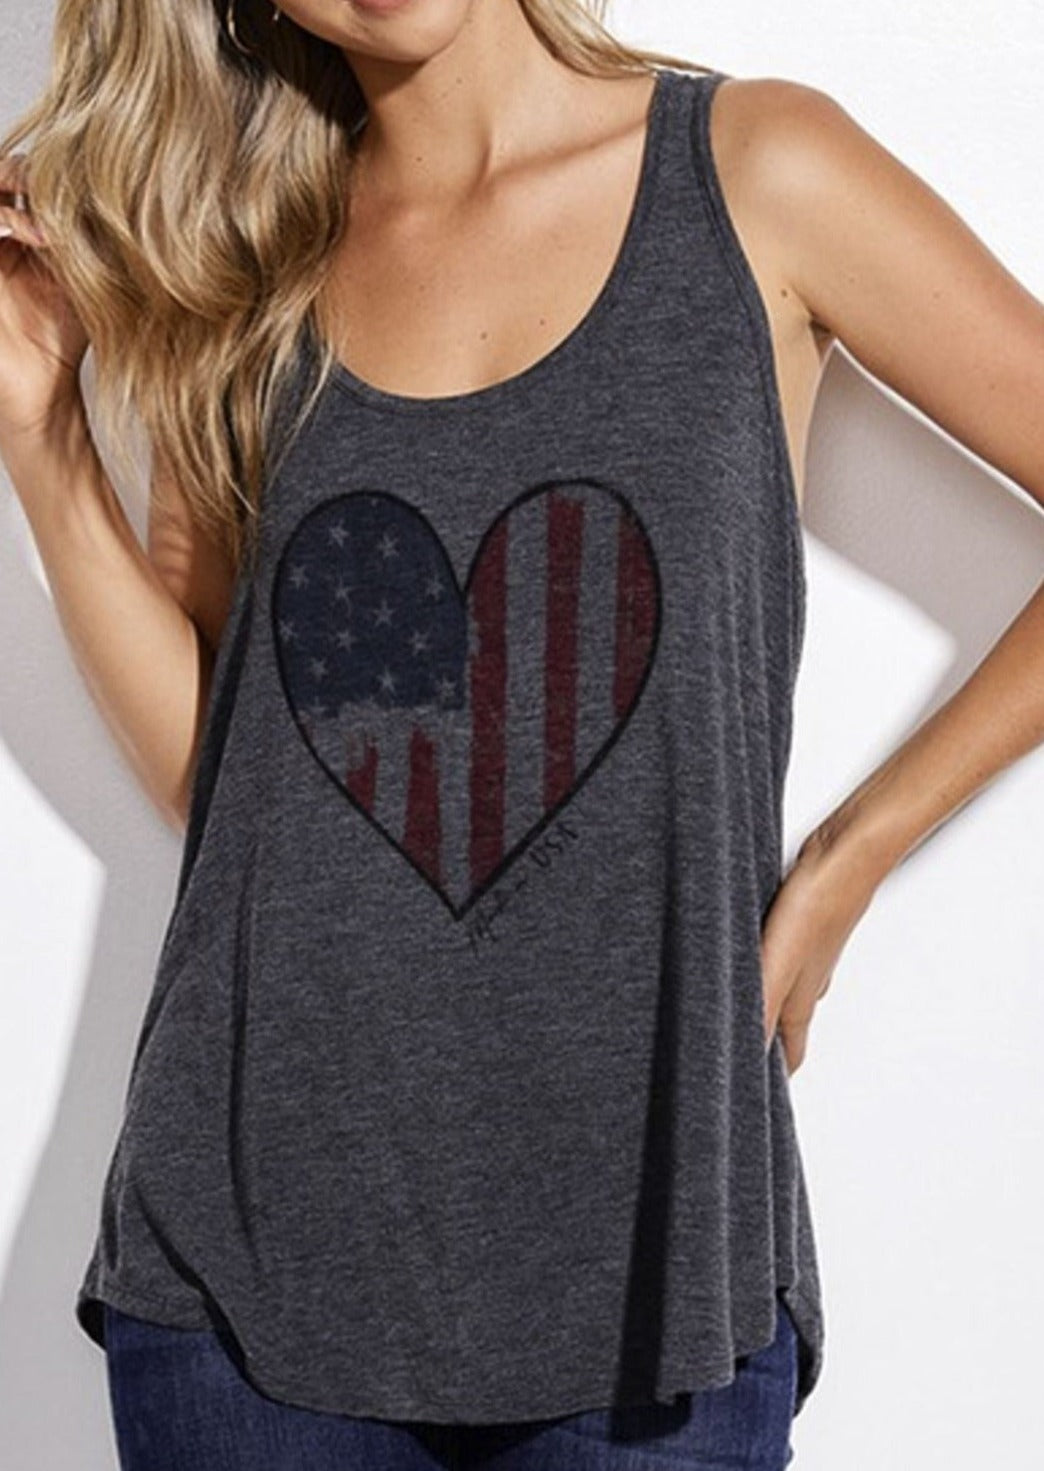 Phil Love Charcoal Gray Super Soft Made in USA American Flag Heart Graphic Tank Top | Made in USA | Classy Cozy Cool Women's American Clothing Boutique